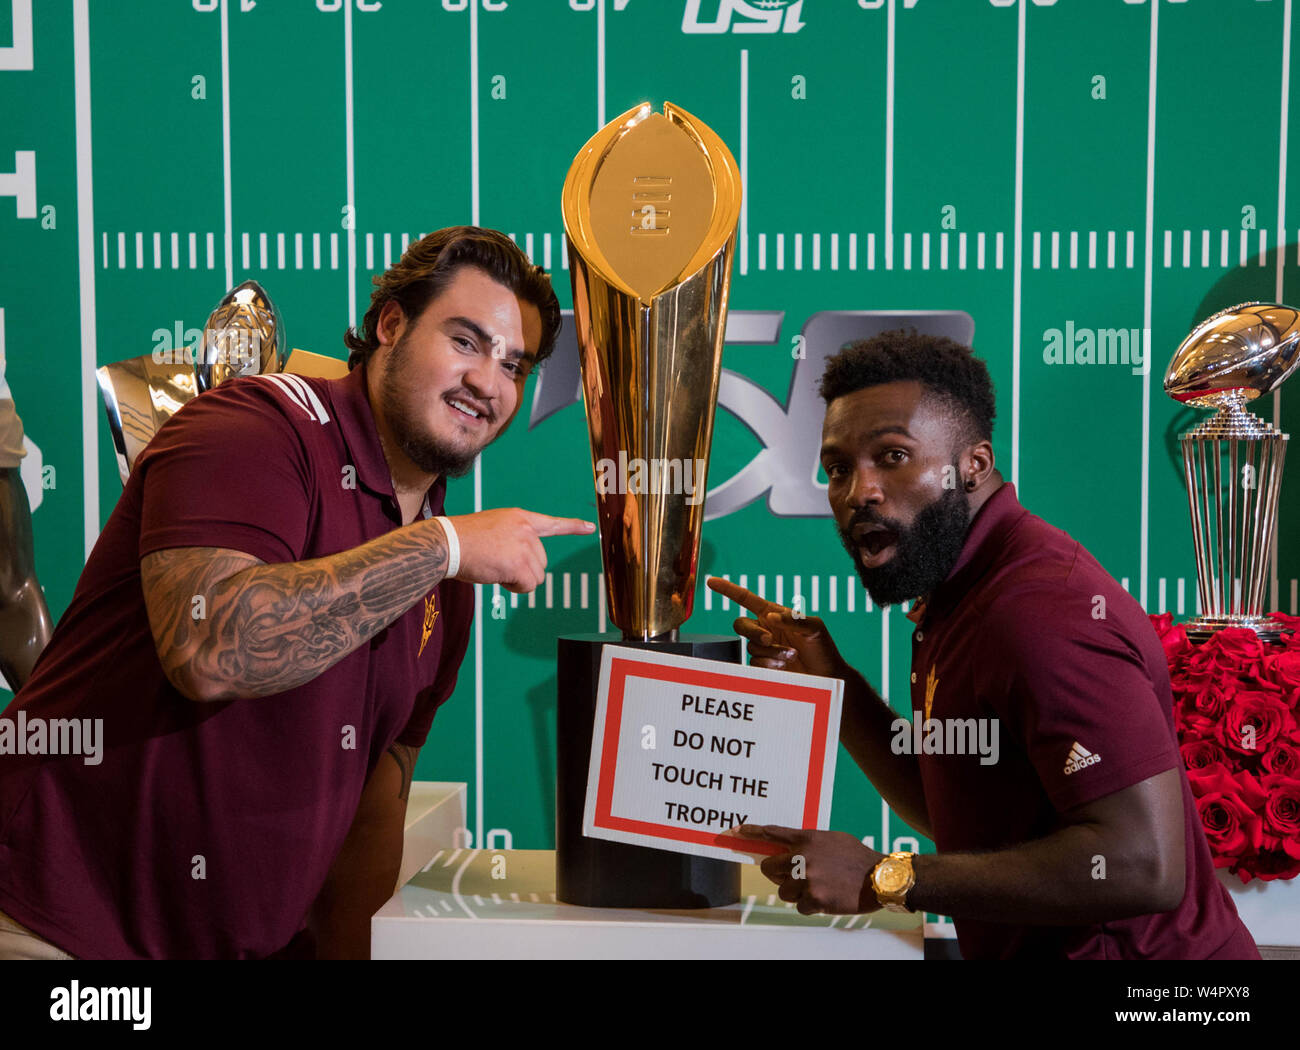 Hollywood, CA. 24th July, 2019. Arizona State Sun Devils running back Eno Benjamin and teammate Cohl Cabral having some fun in front of the Rose Bowl and National Championship trophies at the Pac-12 football media day on Wednesday, July 24, 2019 at the Hollywood and Highland, in Hollywood, CA. (Mandatory Credit: Juan Lainez/MarinMedia.org/Cal Sport Media) (Complete photographer, and credit required) Credit: csm/Alamy Live News Stock Photo